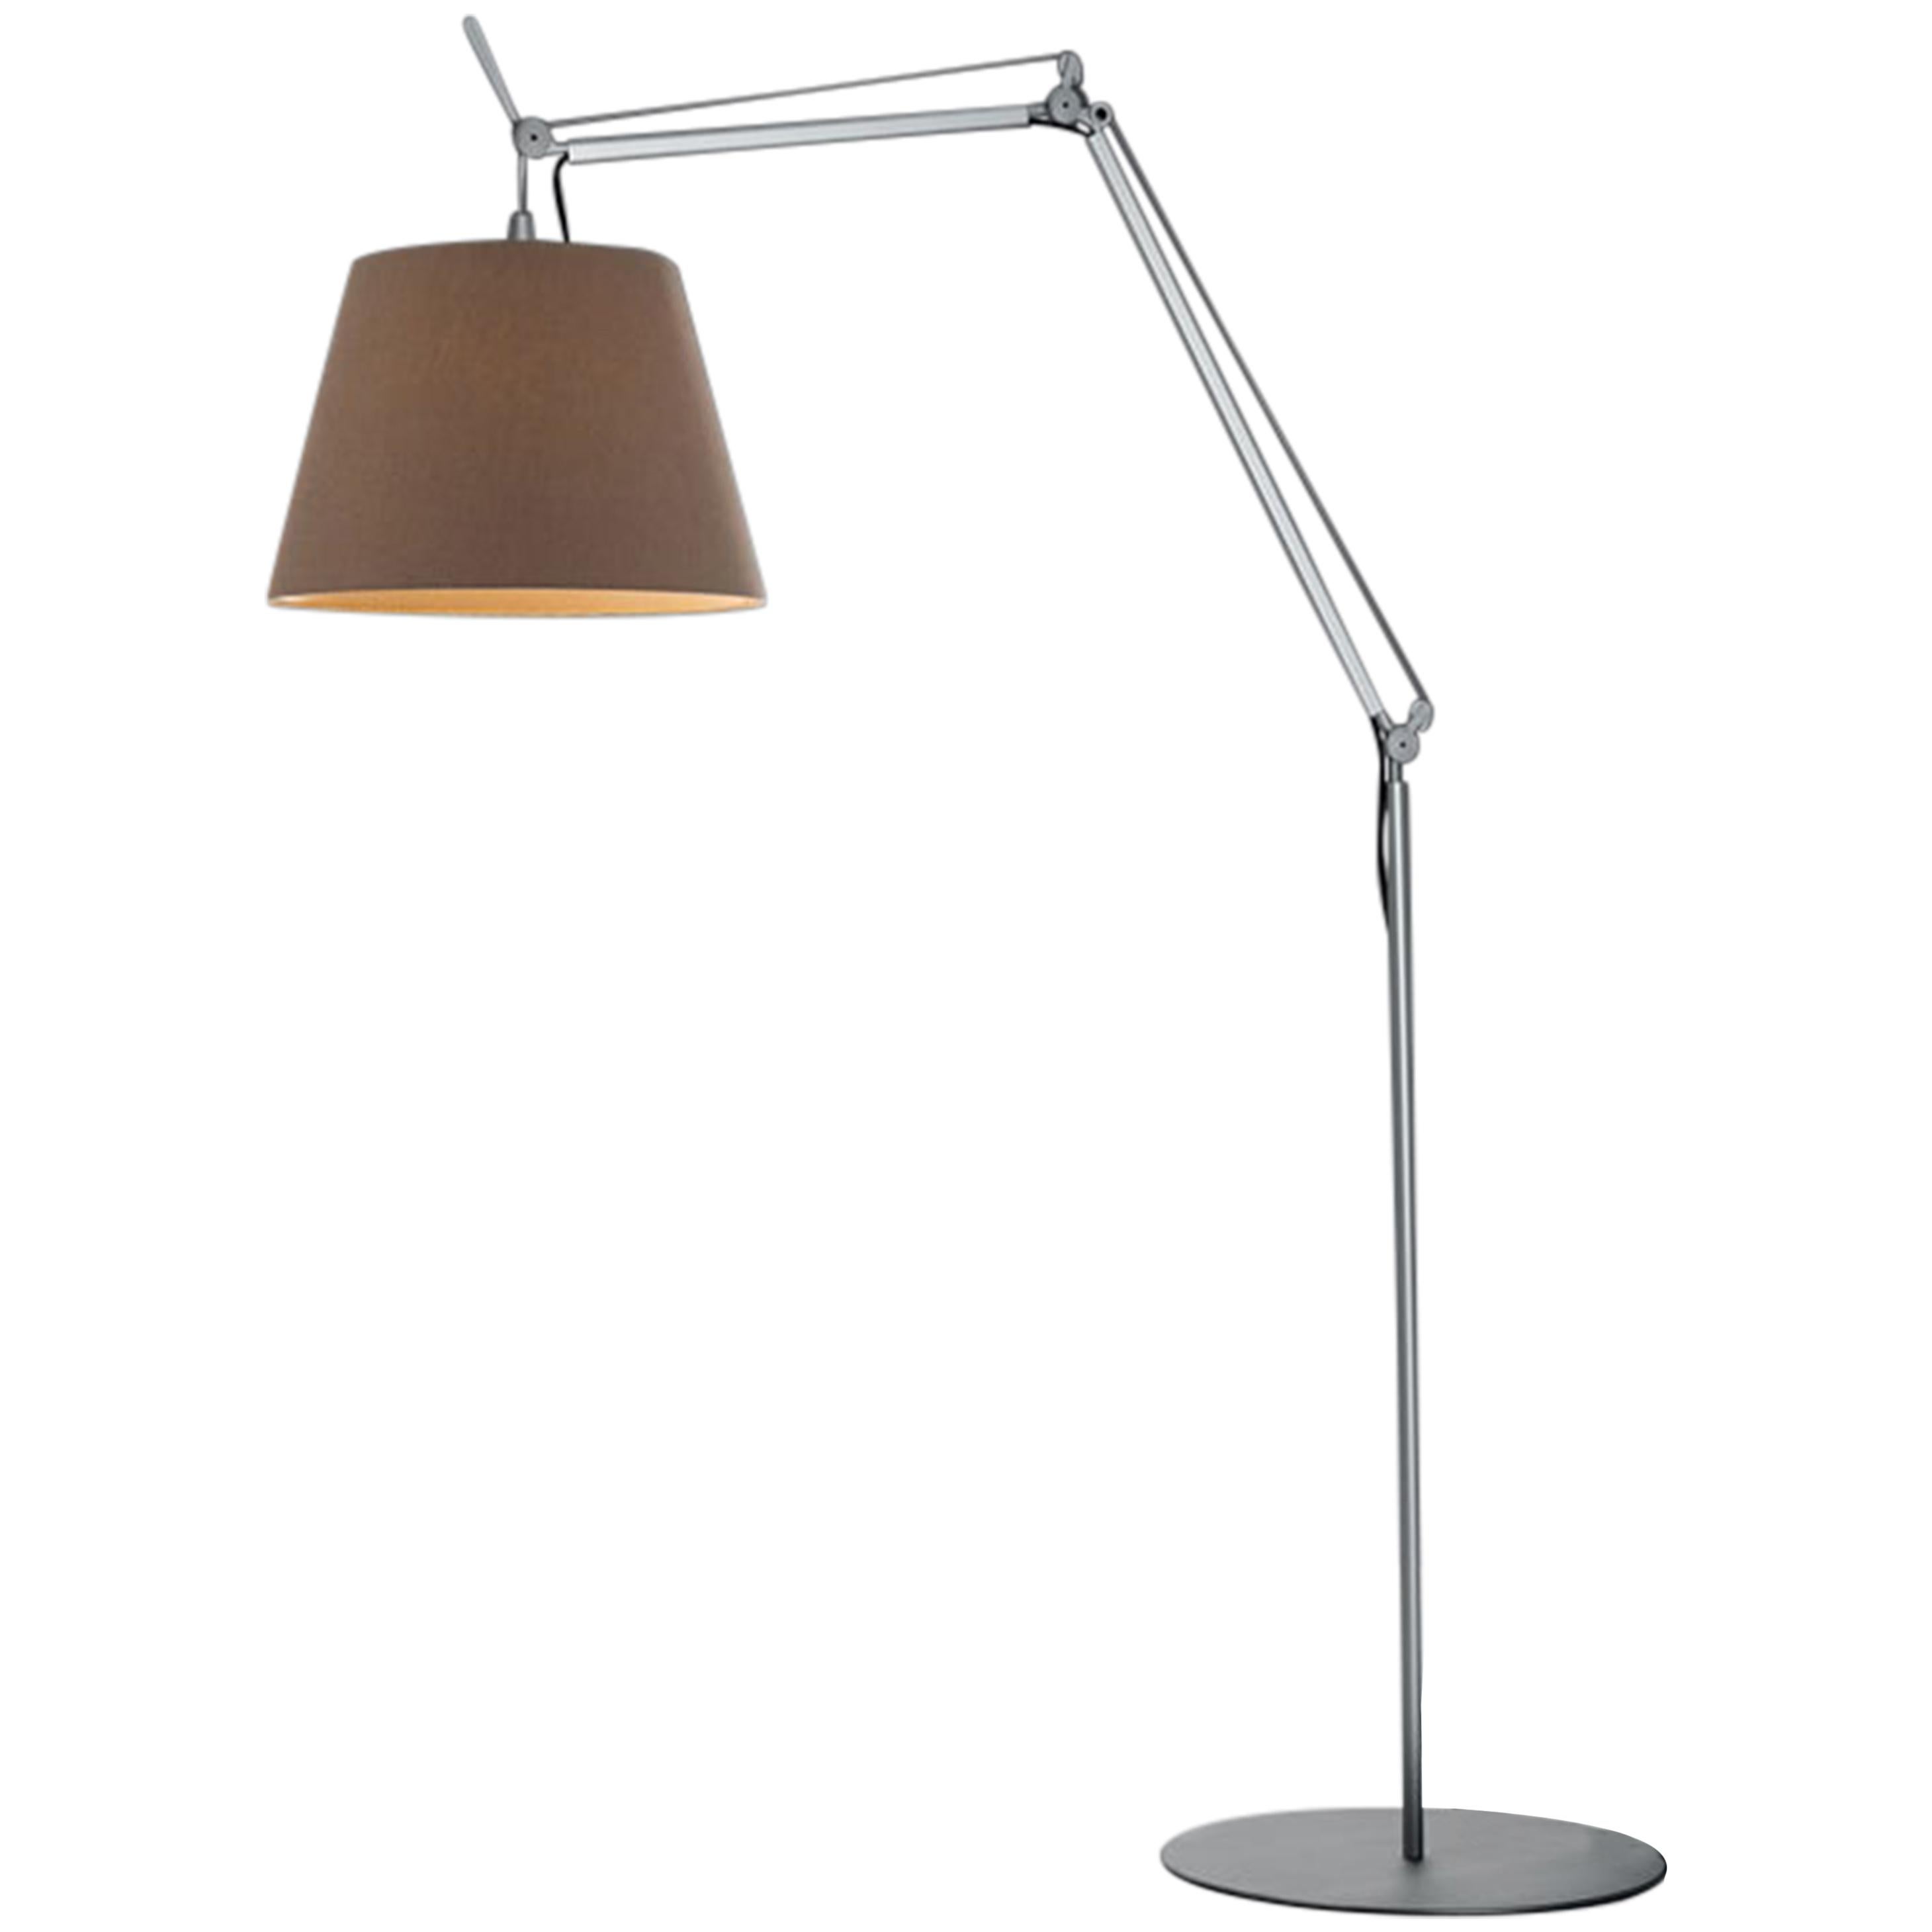 Artemide Tolomeo Mega Outdoor Floor Lamp in Dove Grey by De Lucchi, Fassina  For Sale at 1stDibs